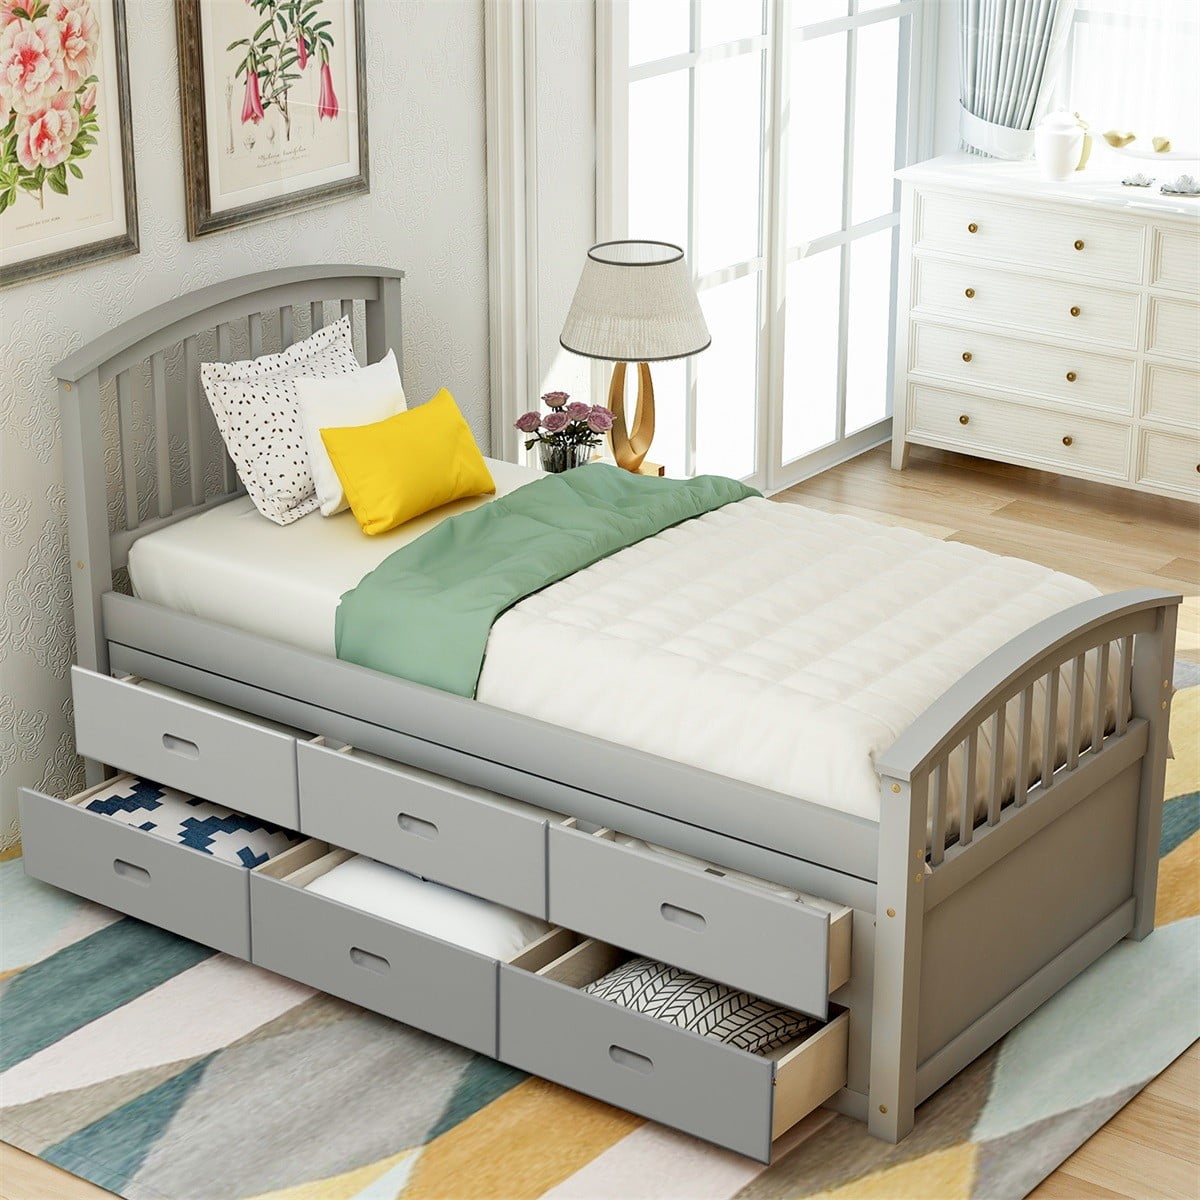 Twin Bed With 6 Drawers Underneath - Queen Bed Drawers Storage Beds ...